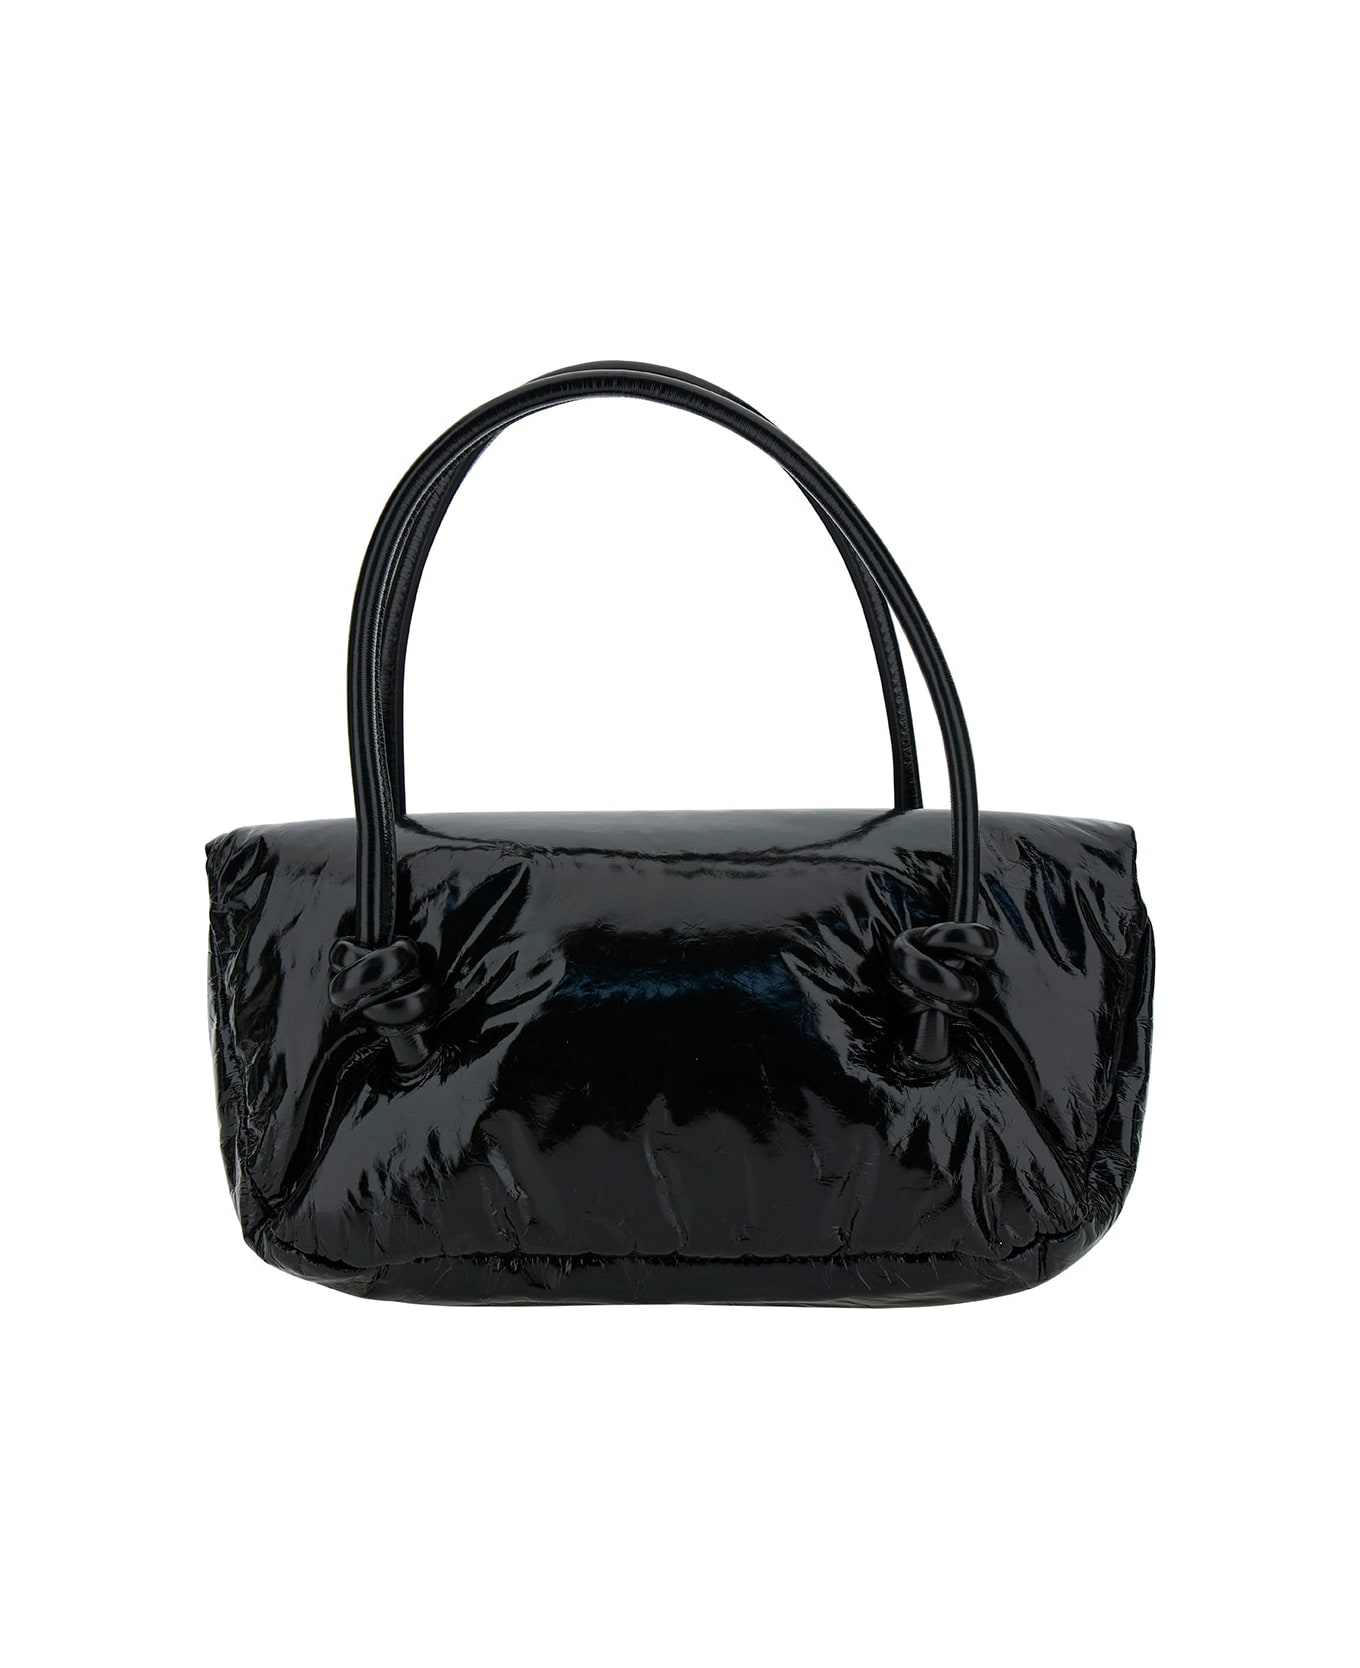 Jil Sander 'knot Small' Black Shoulder Bag With Laminated Logo In Patent Leather Woman - Black